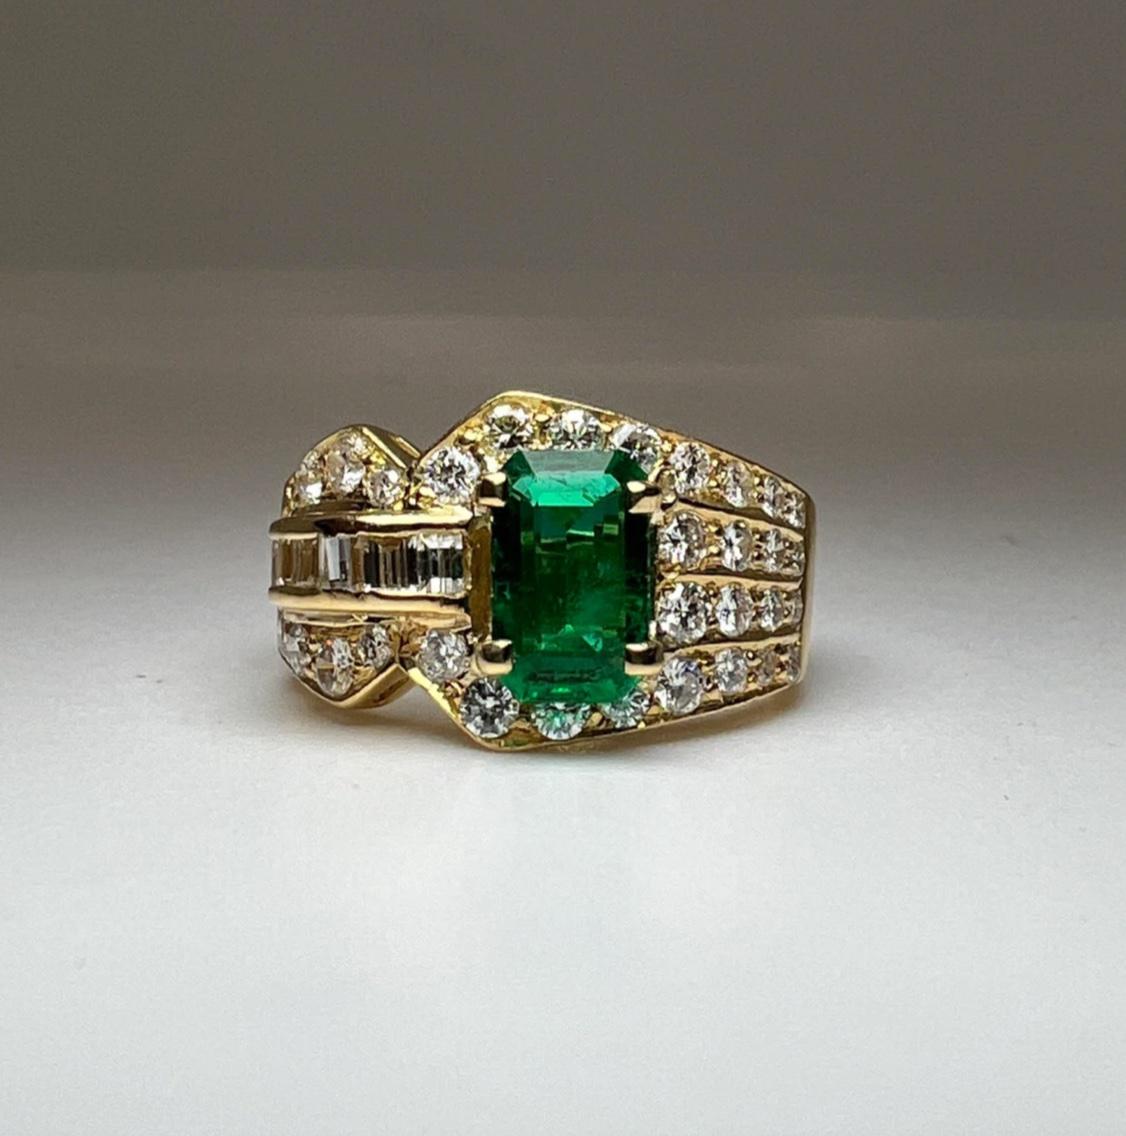 An emerald and diamond ring in size O weighing 7.8 grams with a total of 0.50 carats of diamonds is a stunning and luxurious piece of jewelry. The emerald center stone adds a pop of vibrant green color, while the diamonds add a touch of sparkle and